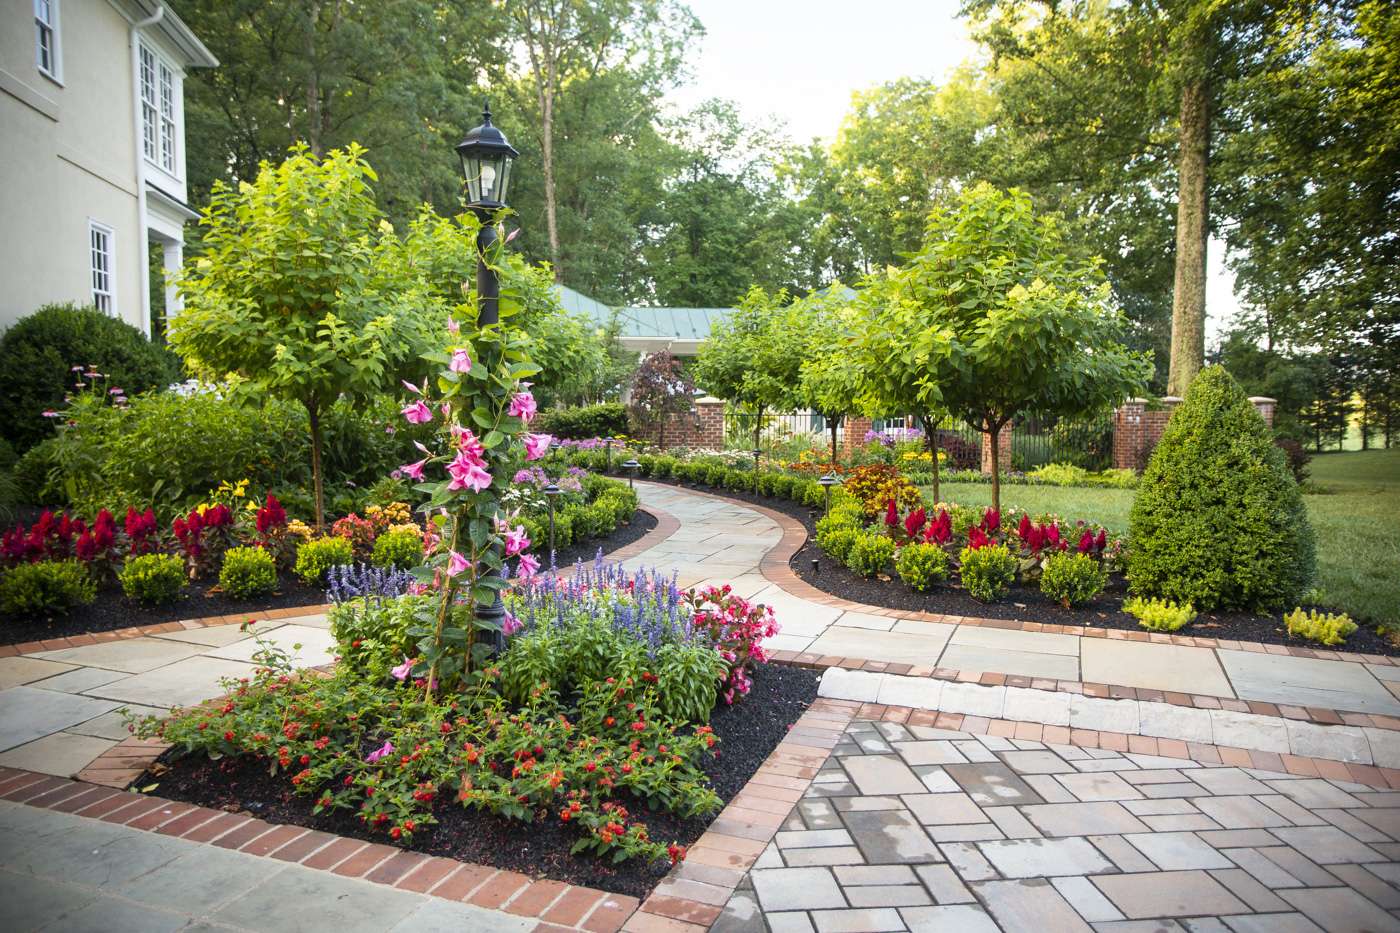 20 of the Best Low Maintenance Trees, Shrubs, & Plants for Virginia